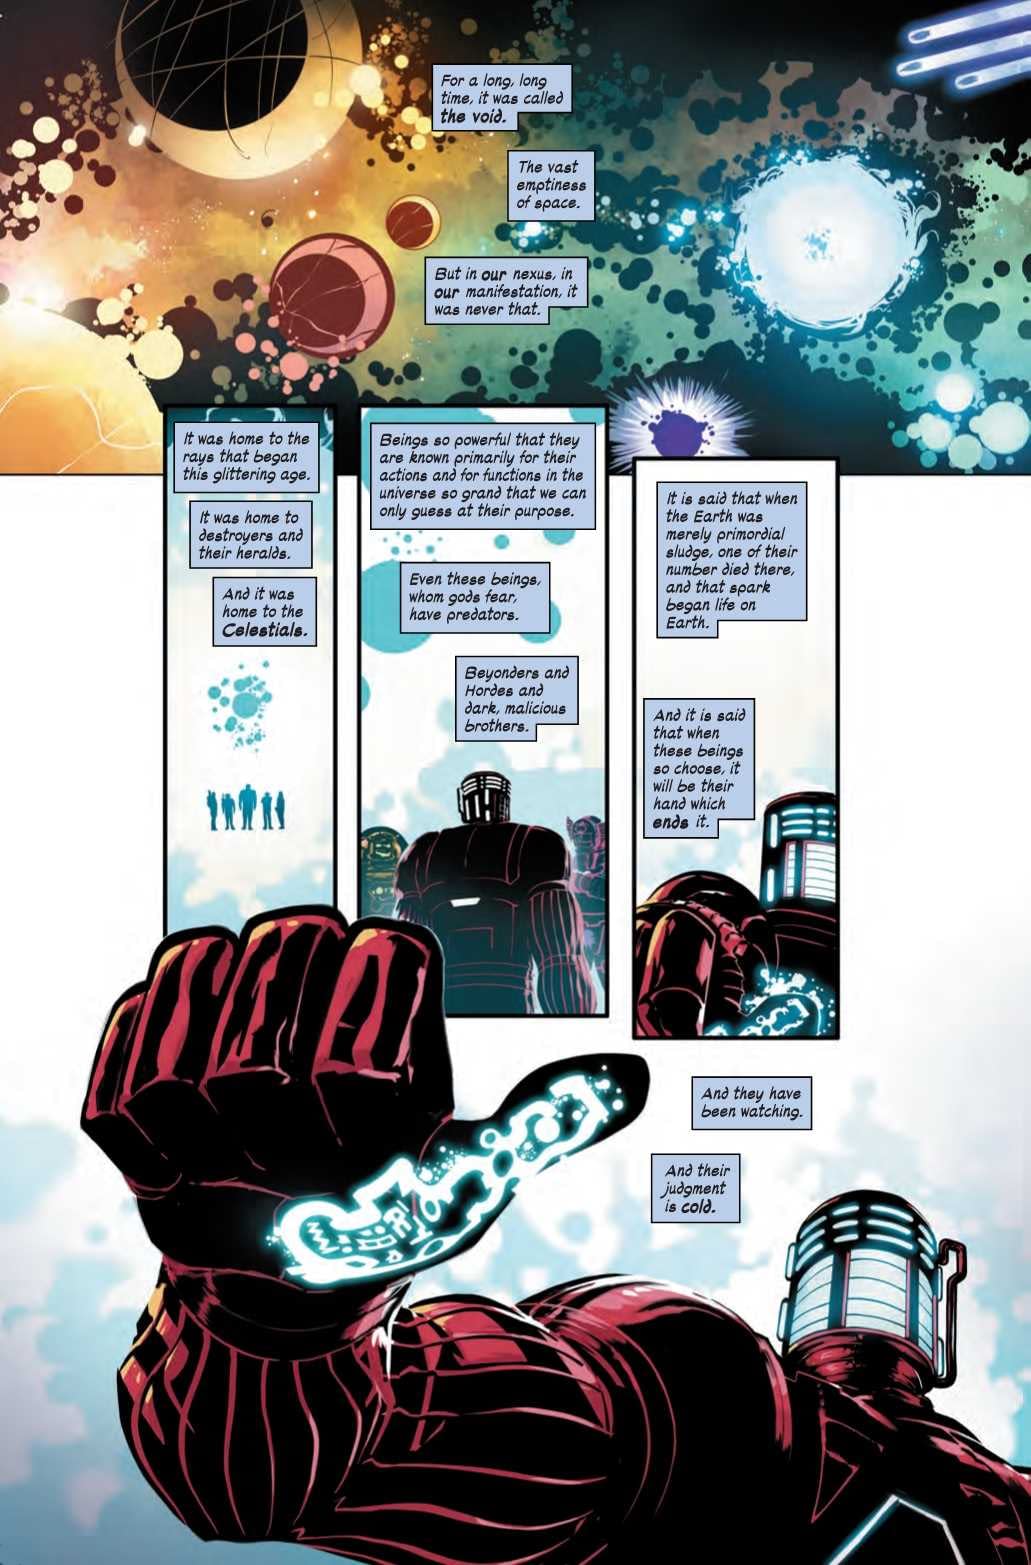 Tony Stark About to Kill Entire City of Buenos Aires in Domino Hotshots #3 (Preview)